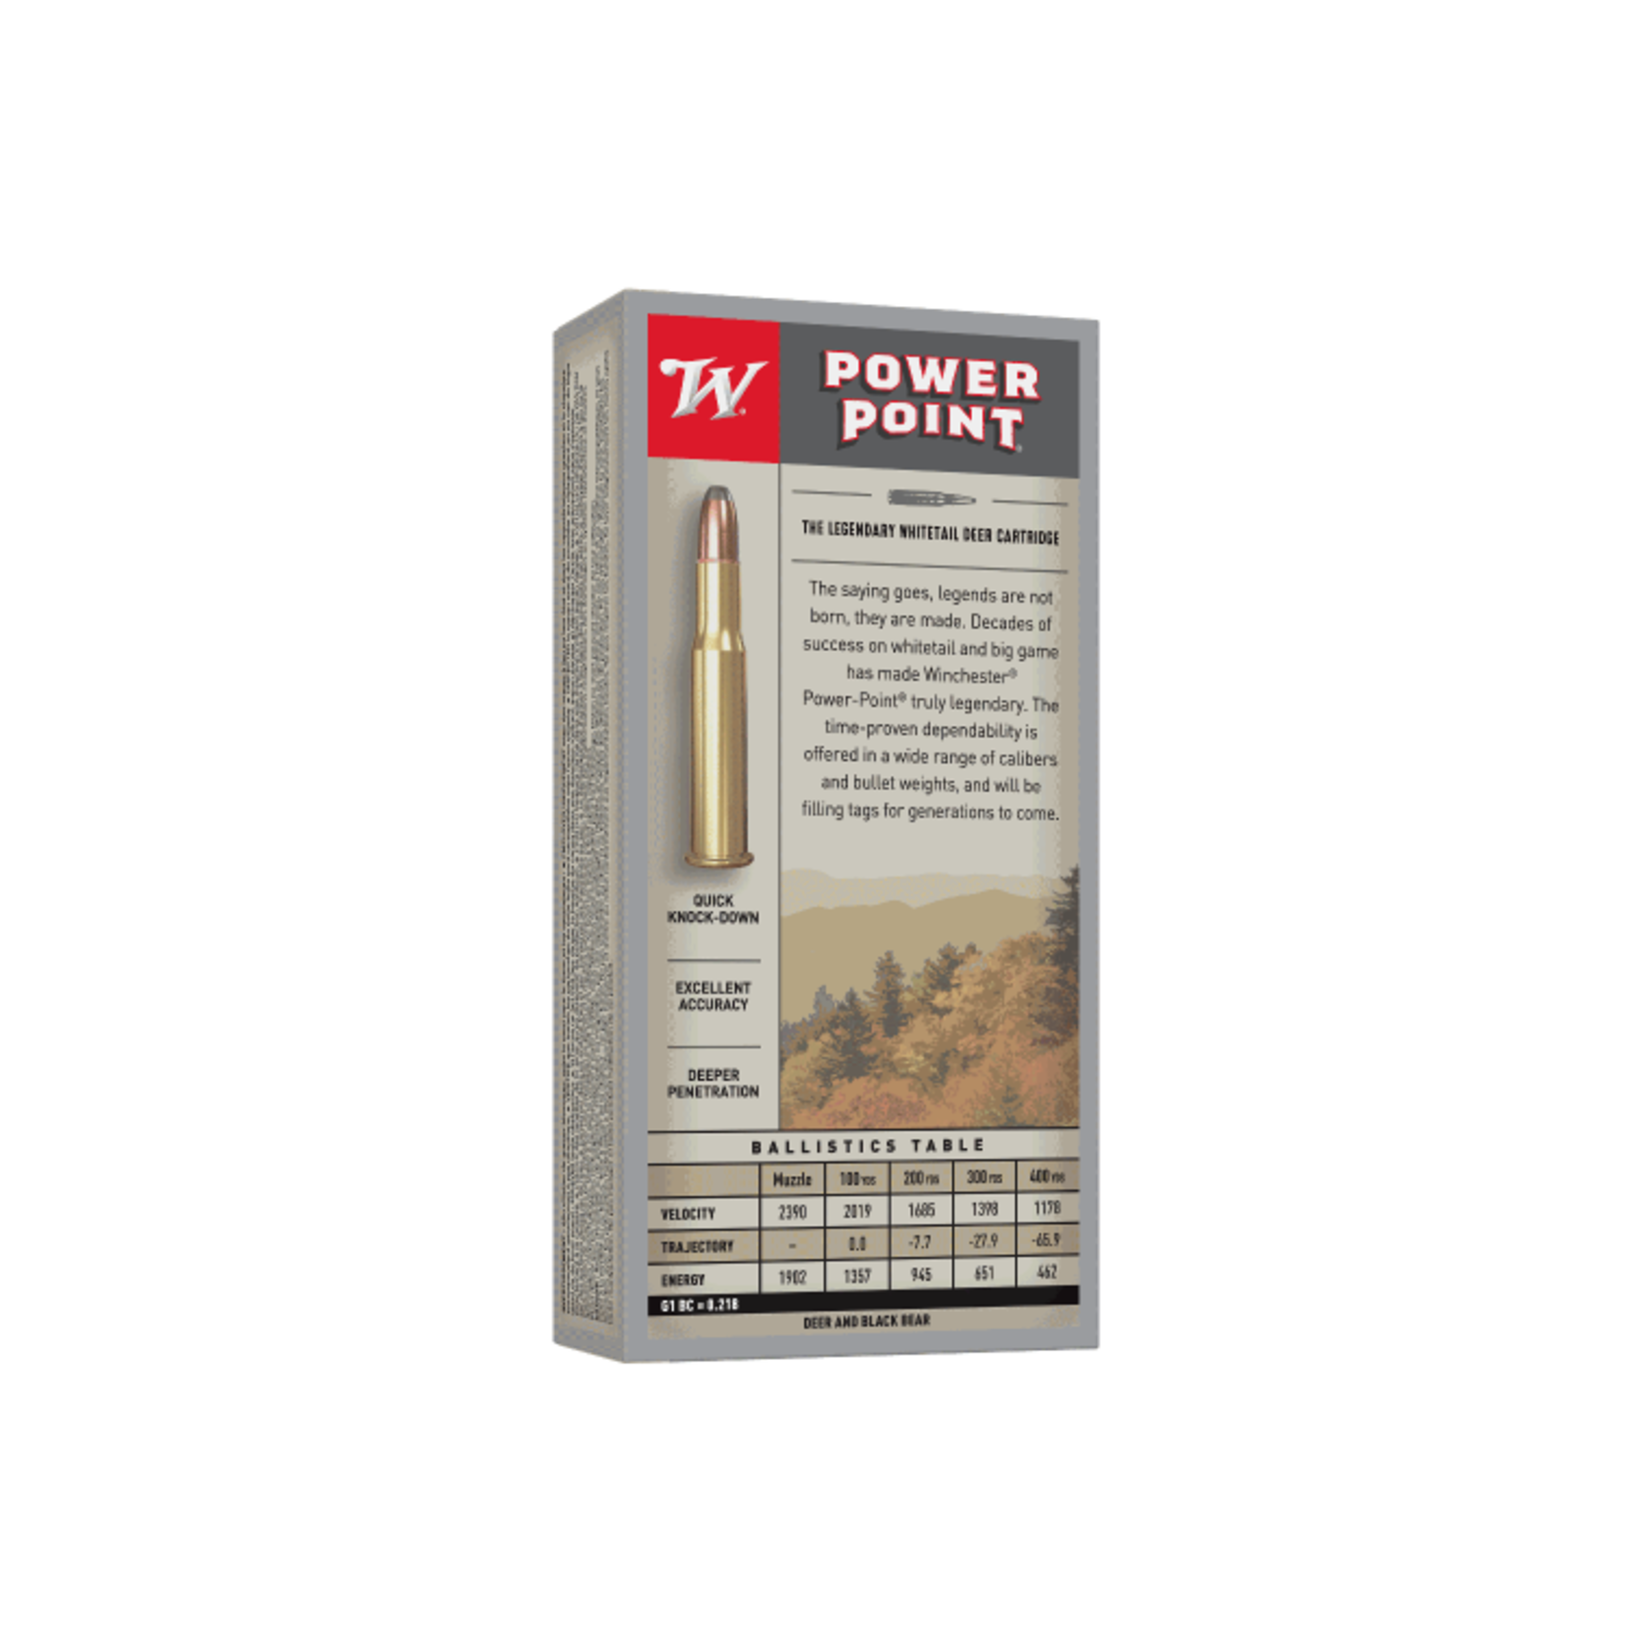 Winchester Winchester 30-30Win 150gr Power Point Super X 2390fps - 20 Pack